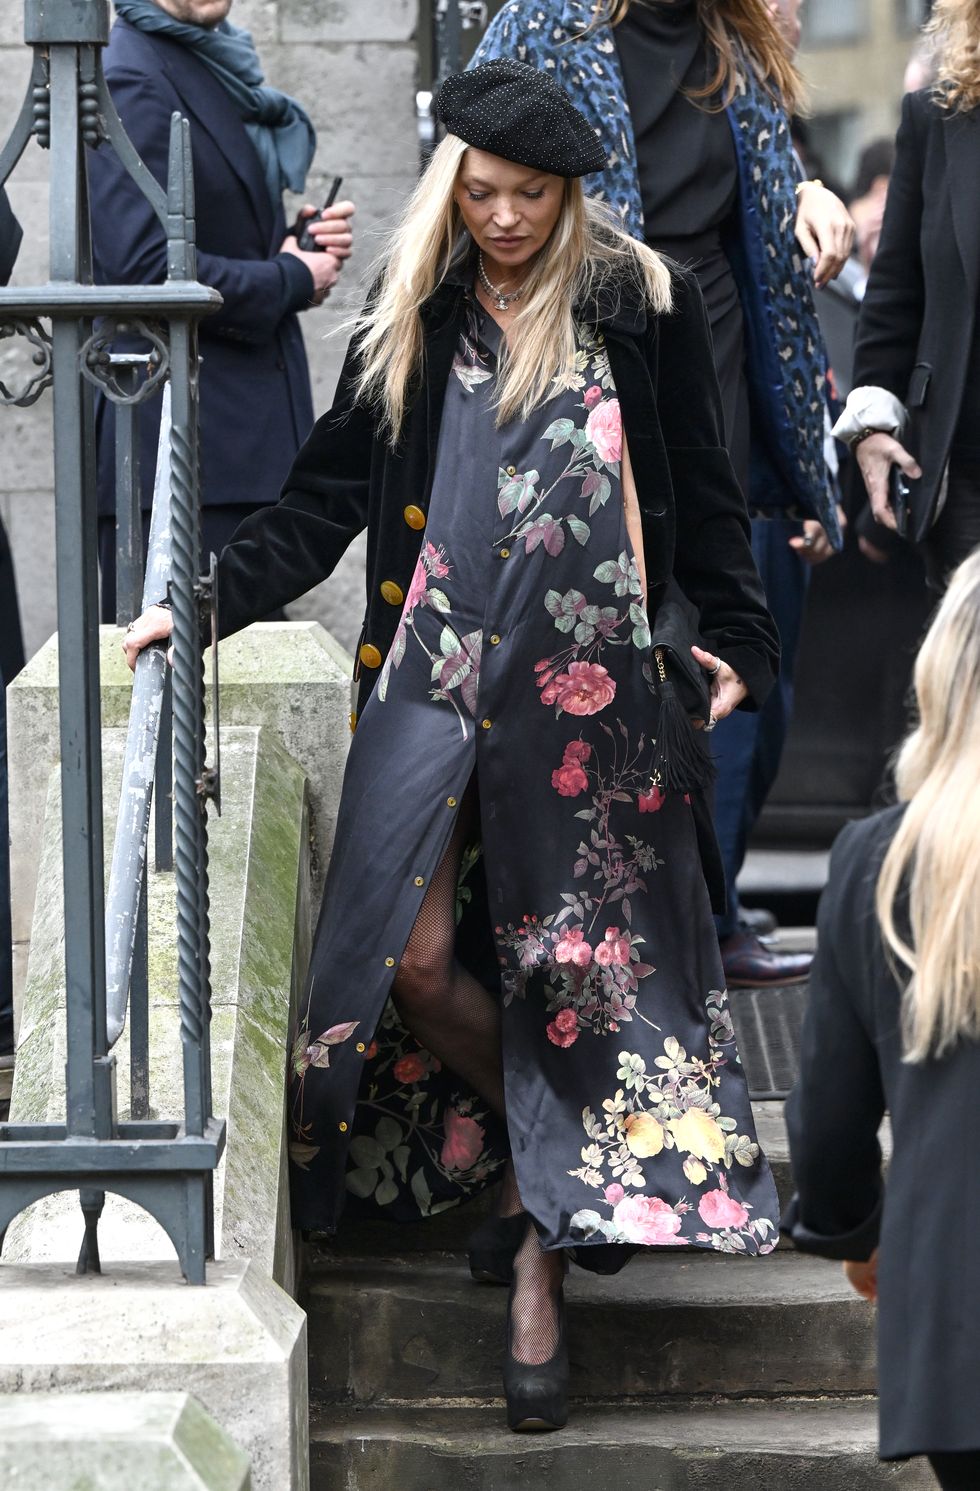 london, england february 16 kate moss attends a memorial service to honour and celebrate the life of dame vivienne westwood at southwark cathedral on february 16, 2023 in london, england british fashion designer dame vivienne westwood, known for her punk and new wave designs, died on december 29 at the age of 81 photo by jeff spicergetty images